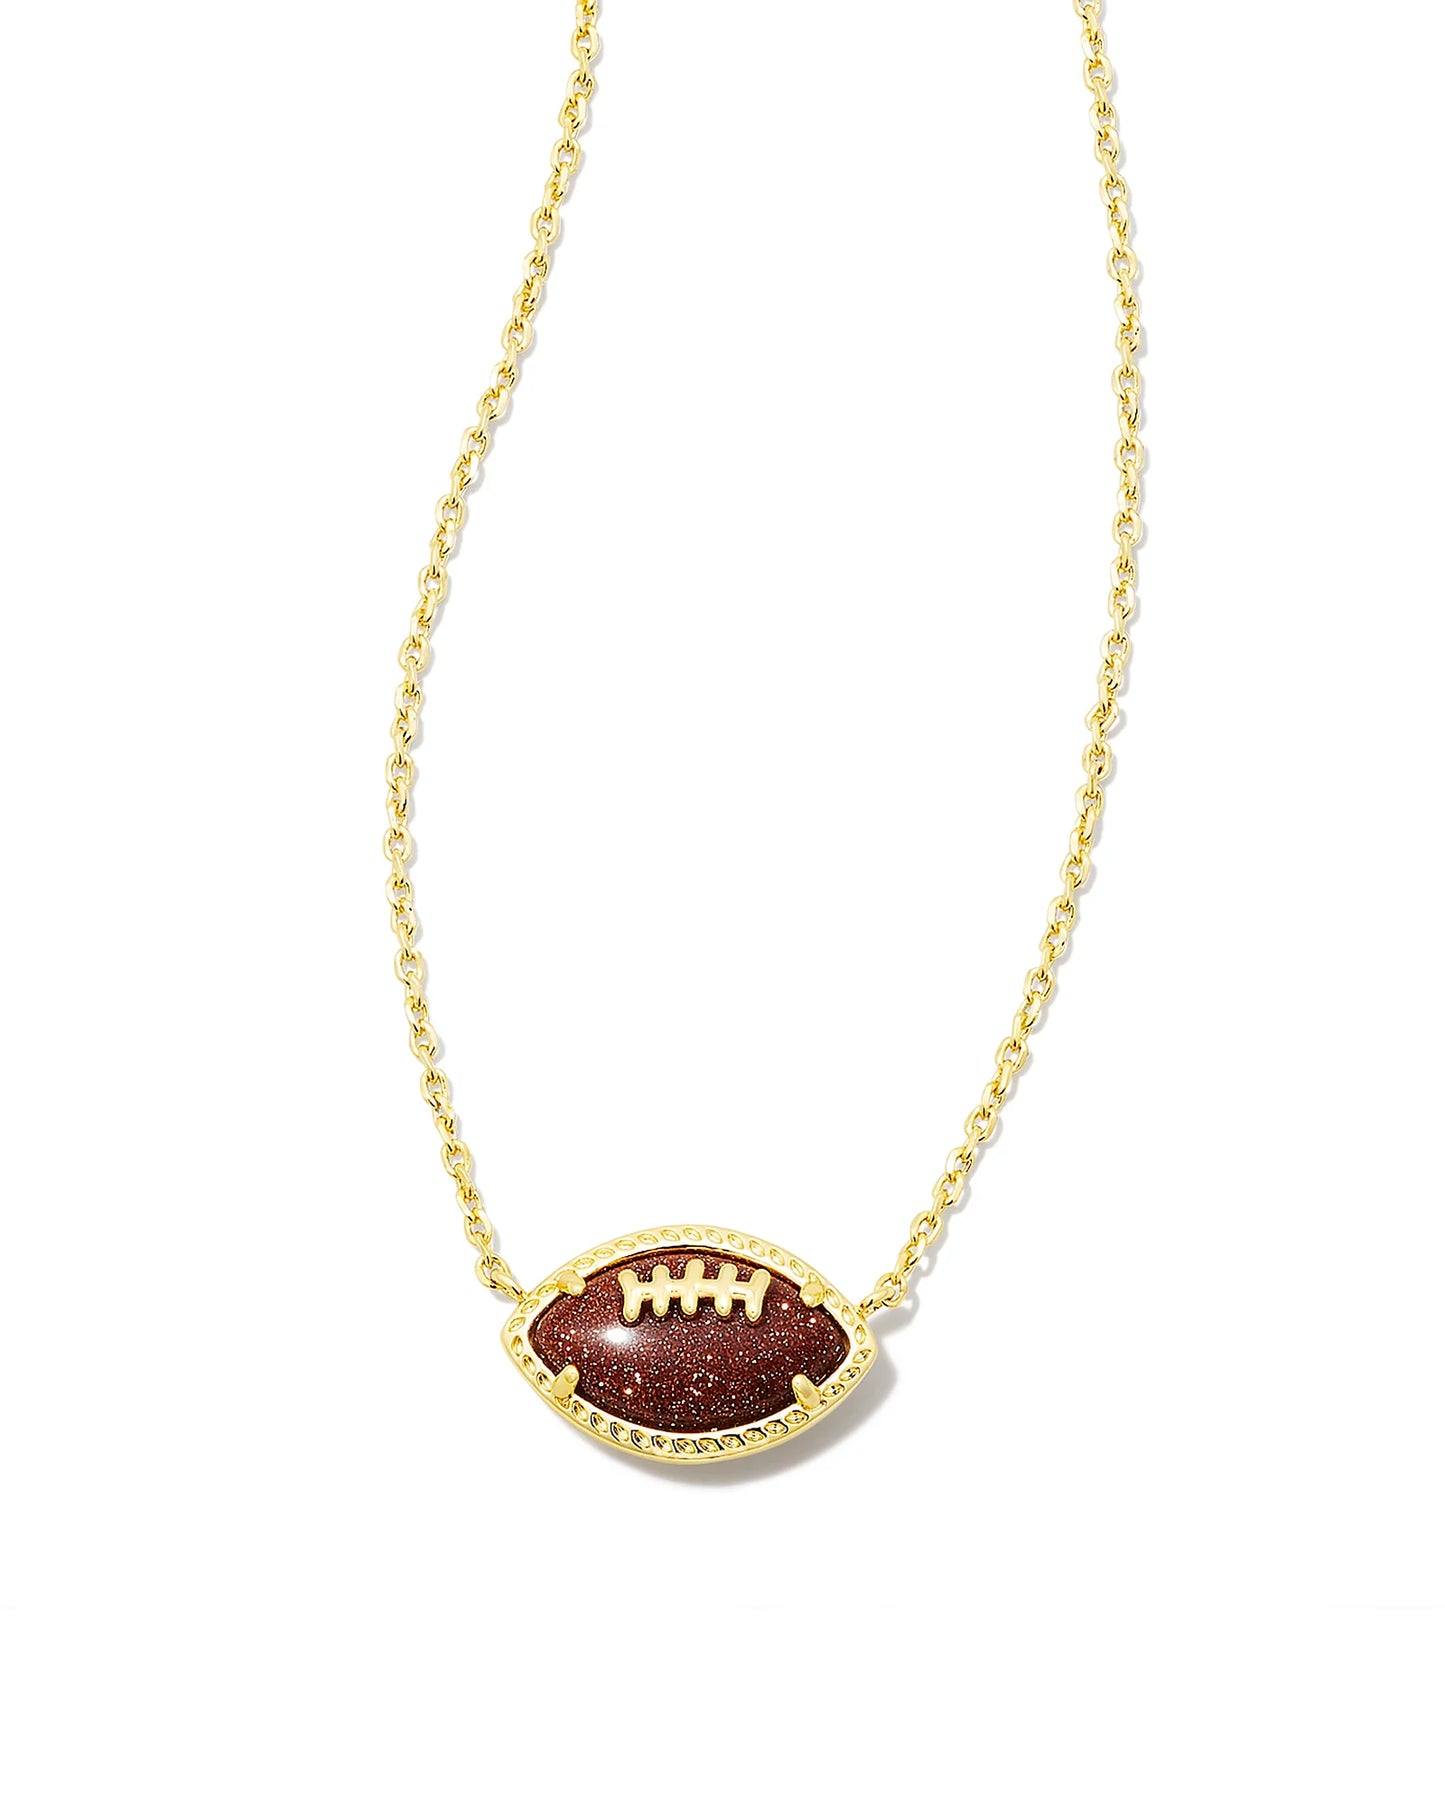 Kendra Scott Football Short Pendant Necklace Gold Orange Goldstone-Necklaces-Kendra Scott-N00329GLD-The Twisted Chandelier